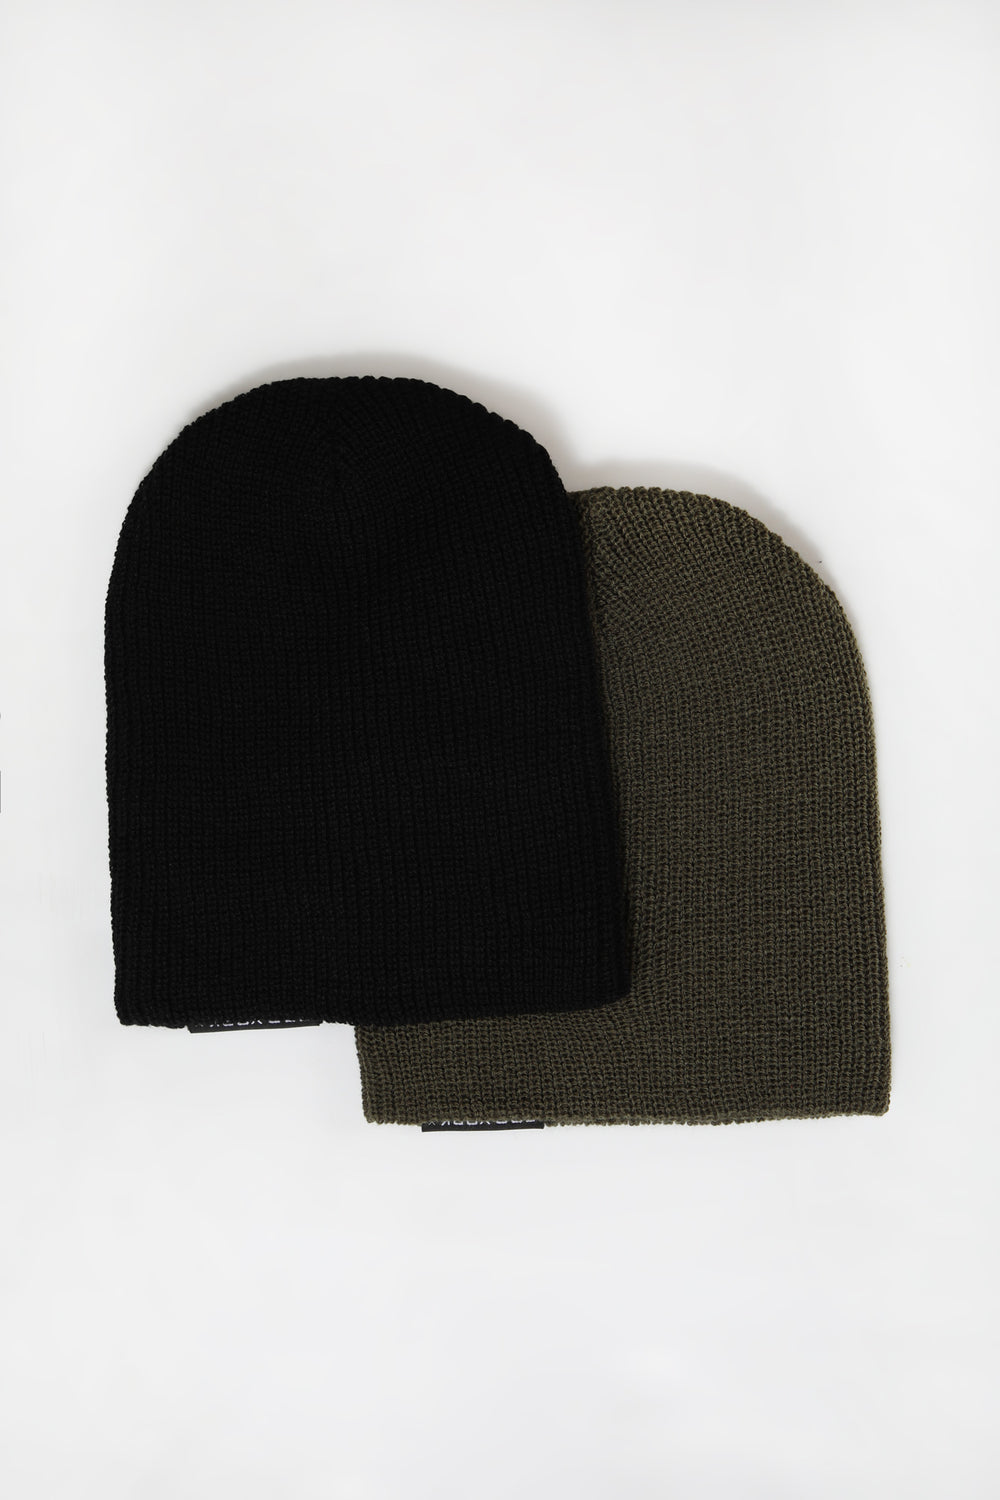 2 Tuques Style Slouchy Zoo York Homme Vert fonce